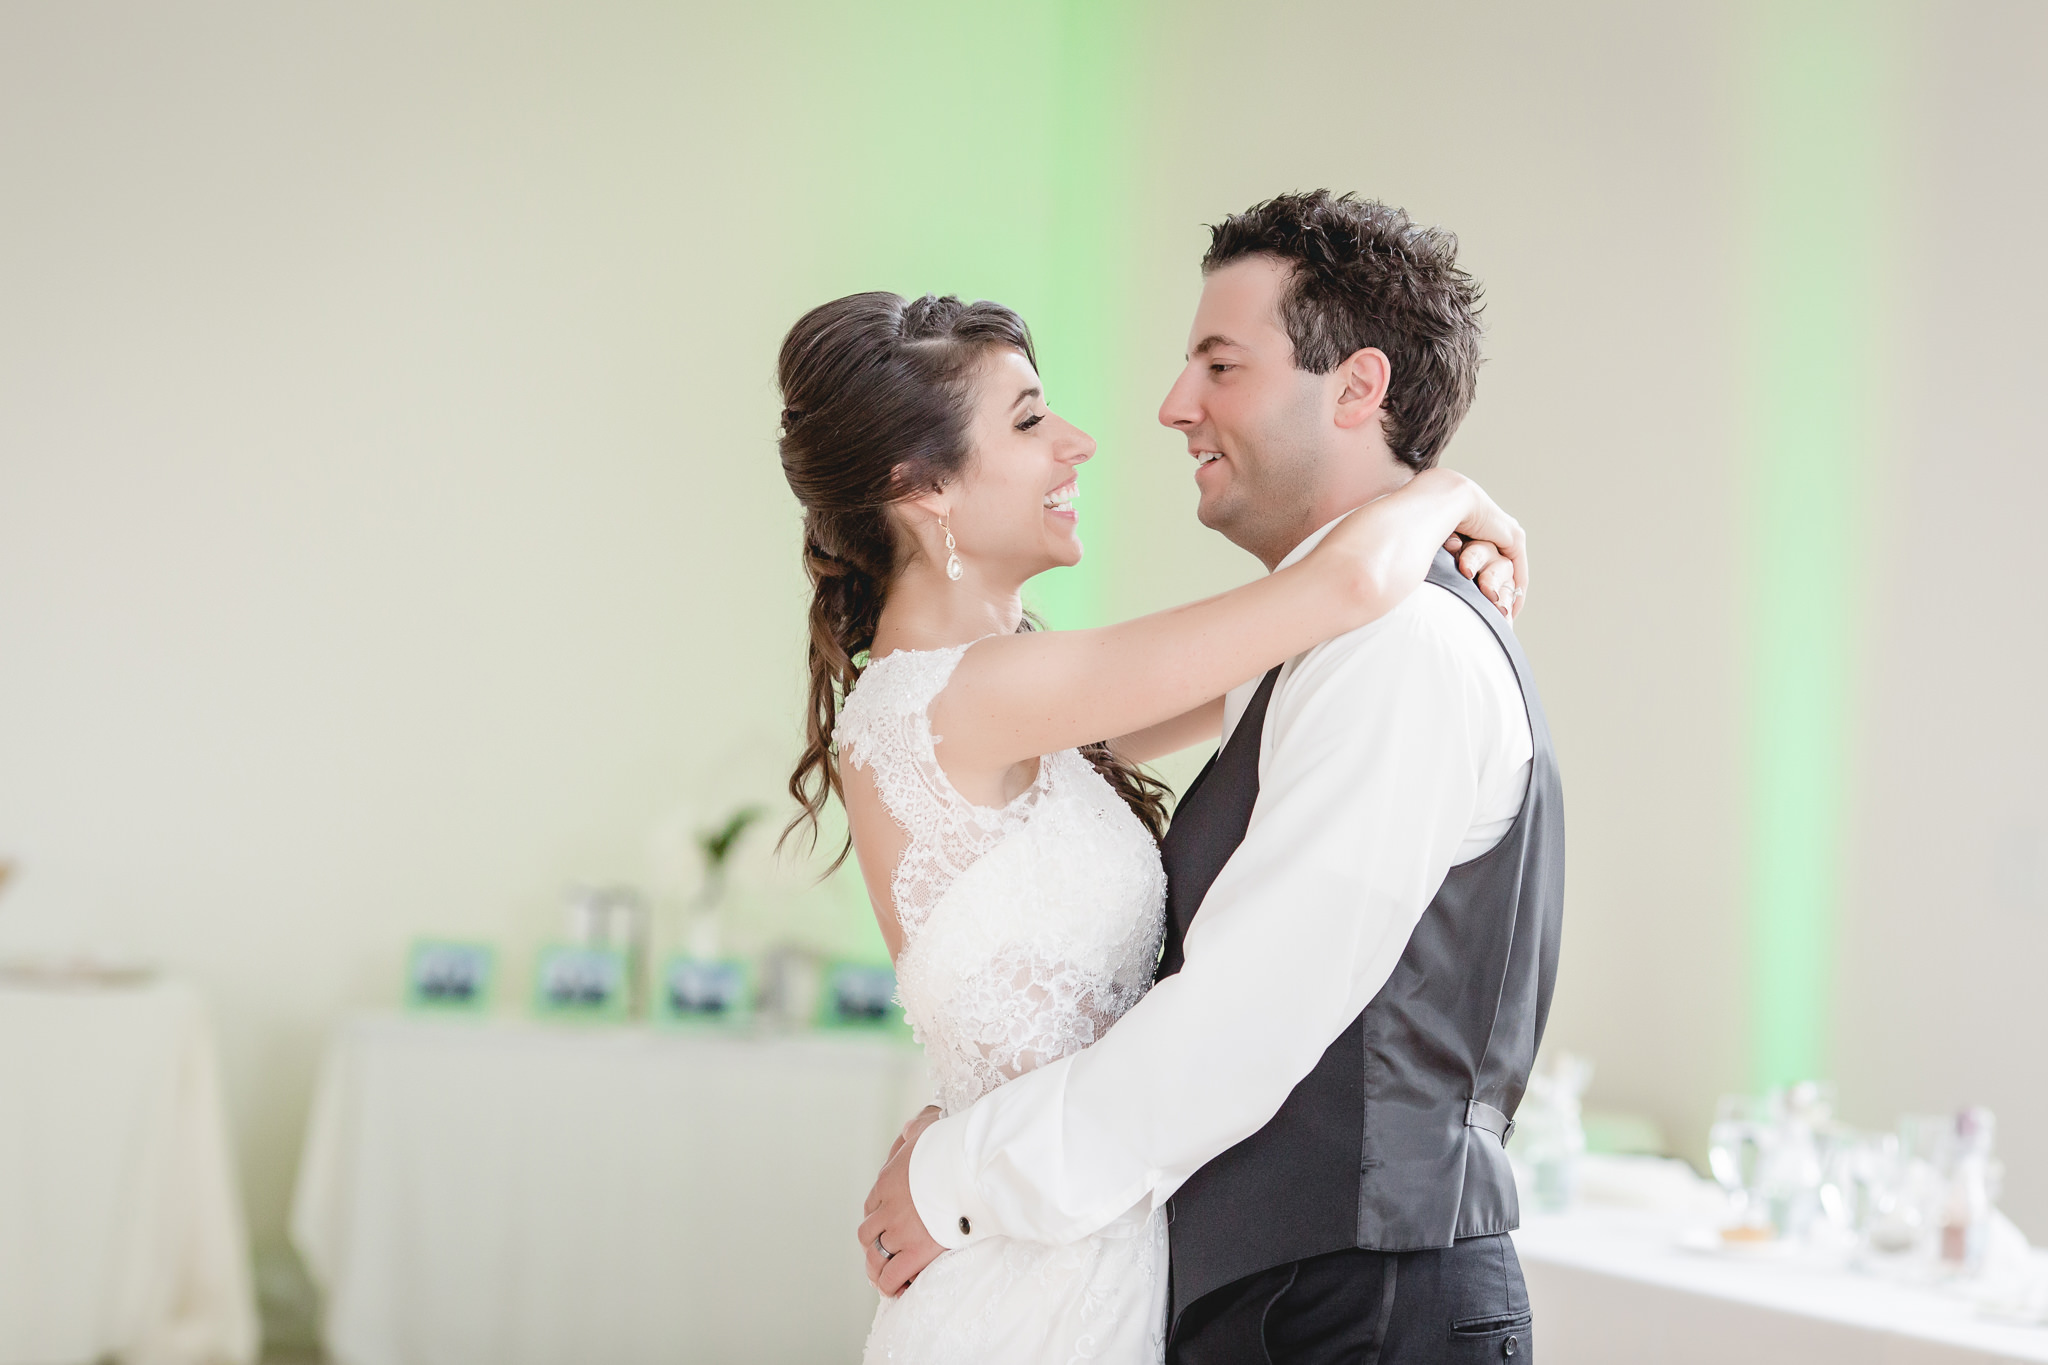 Bride and groom dancing together at their Greystone Fields wedding reception